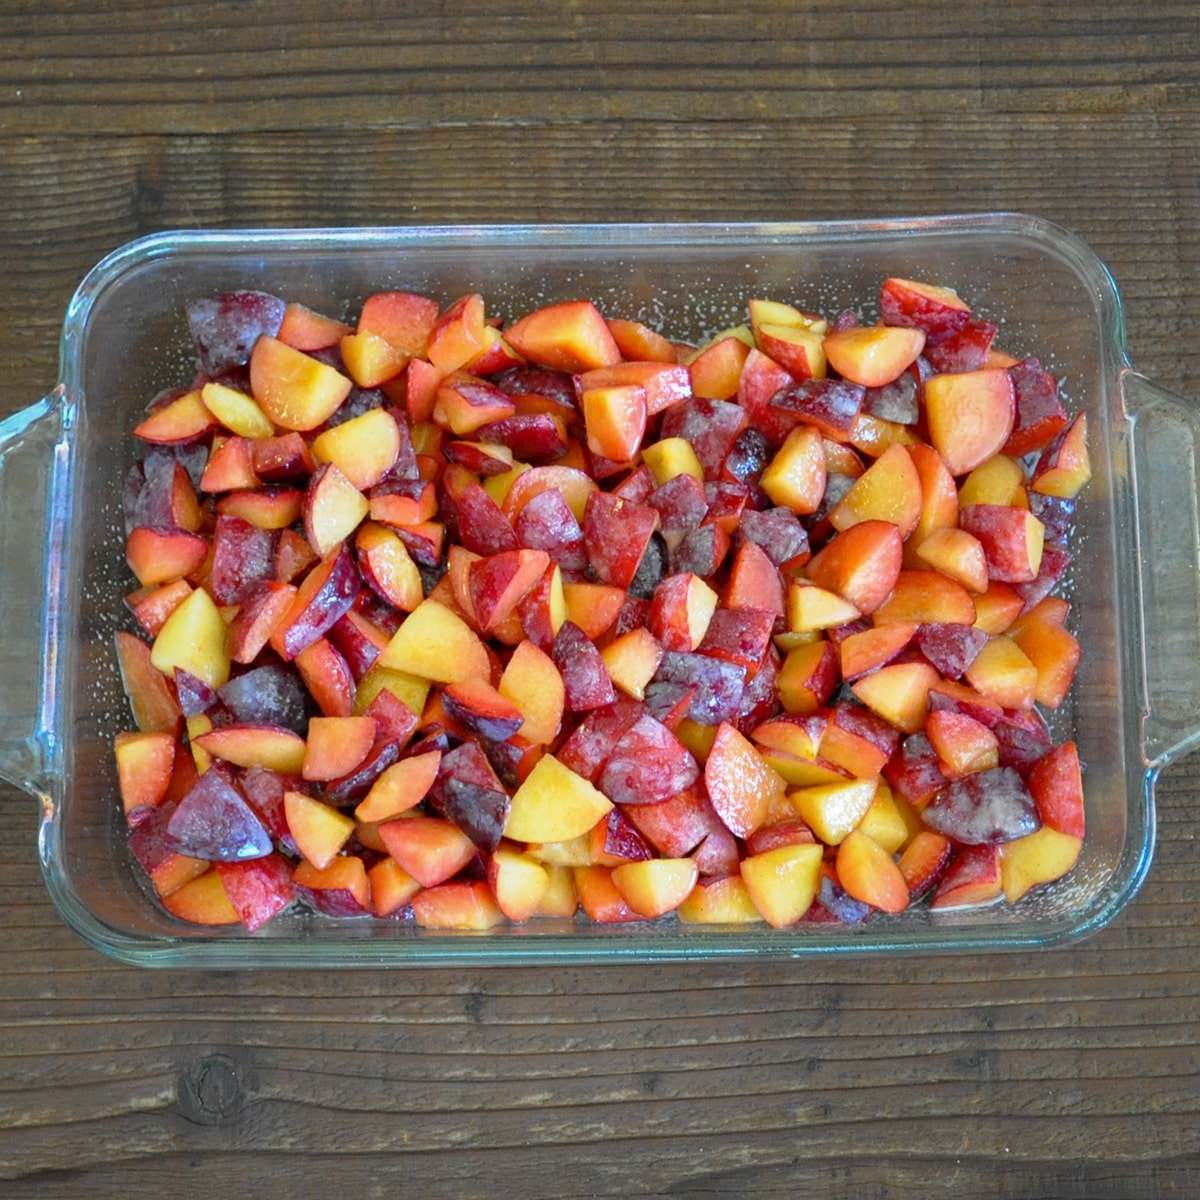 diced plums coated with sugar in a baking dish